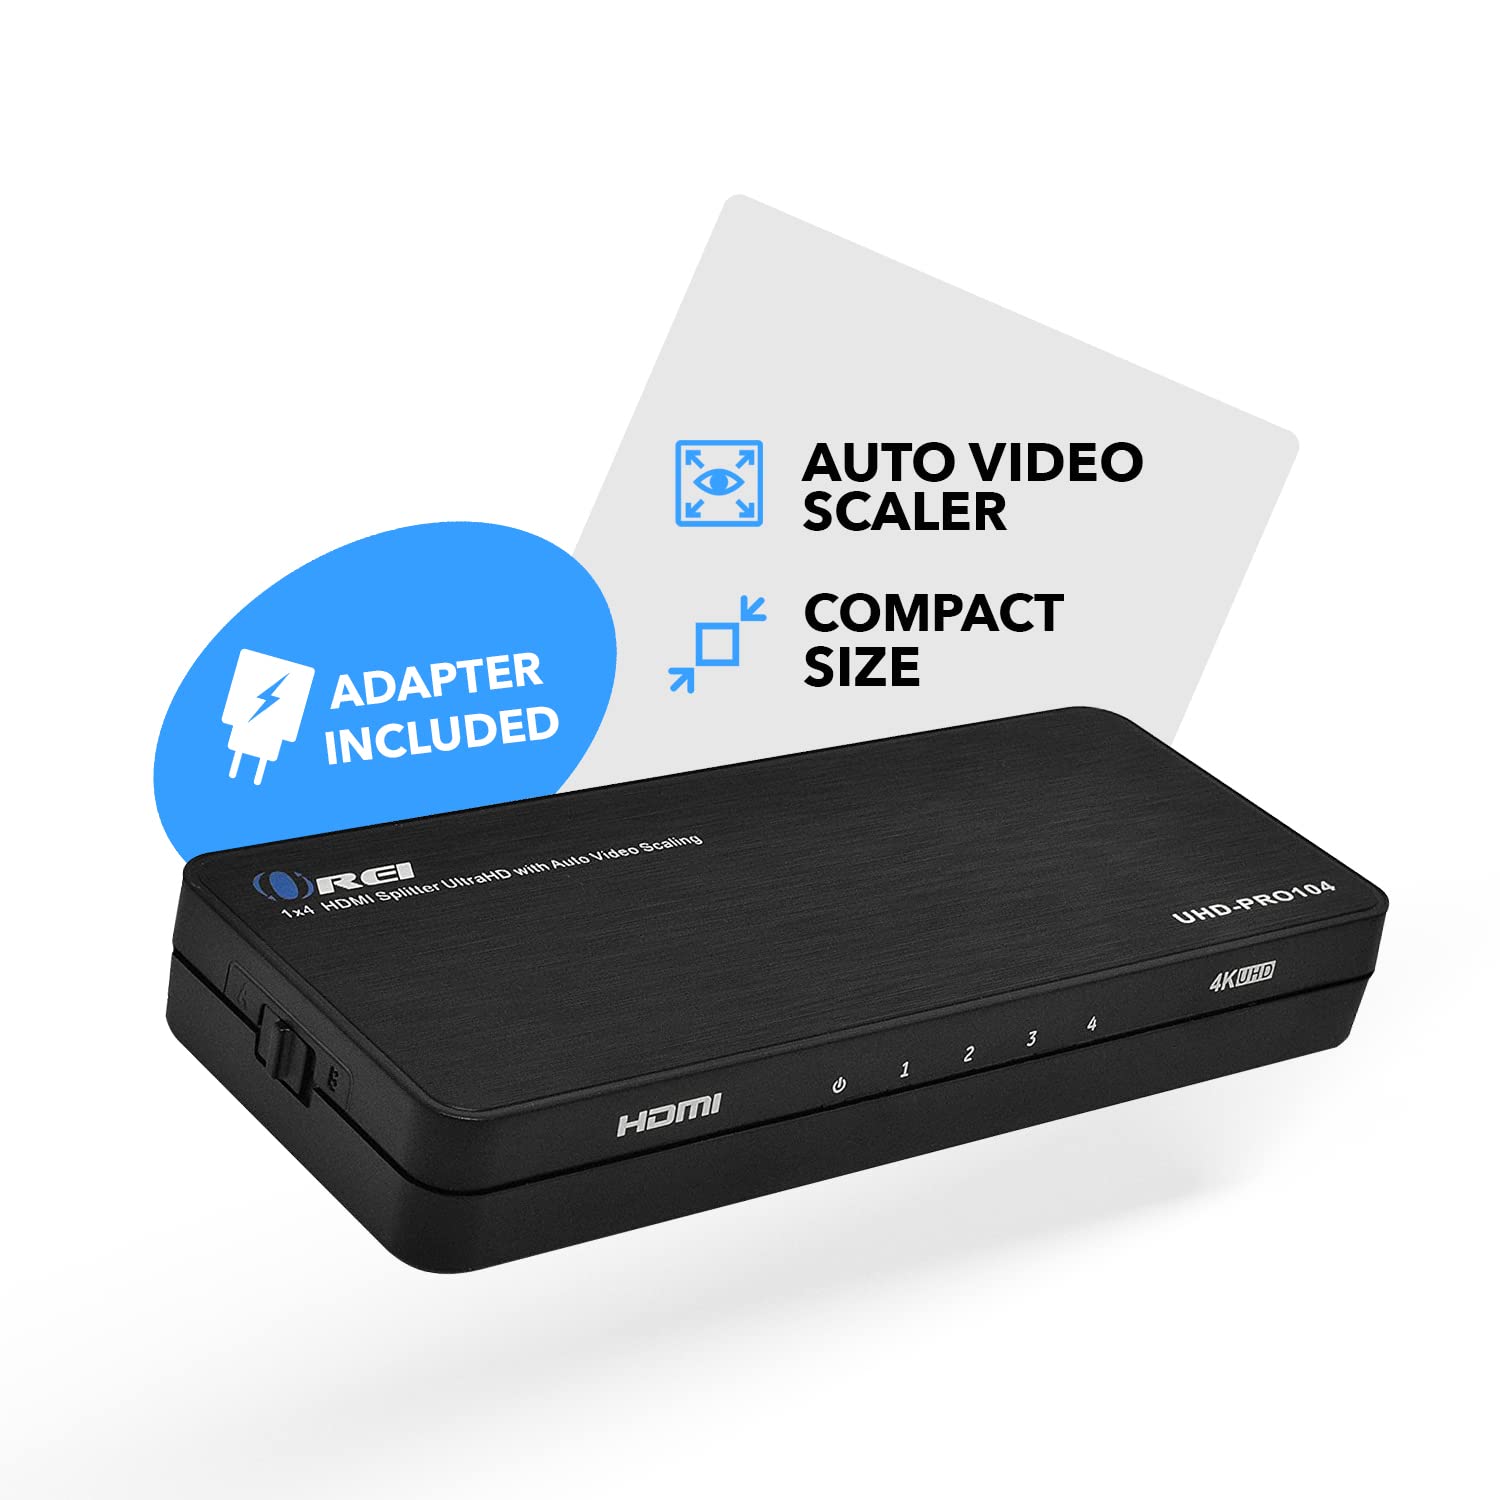 OREI 4K 1x4 HDMI Splitter Duplicater - with Down Scaler 4 Ports with Full Ultra HD, HDCP 2.2, Upto 4K at 60Hz, 1080p & 3D Supports EDID Control - UHDPRO-104, Model Number: UHD-PRO104